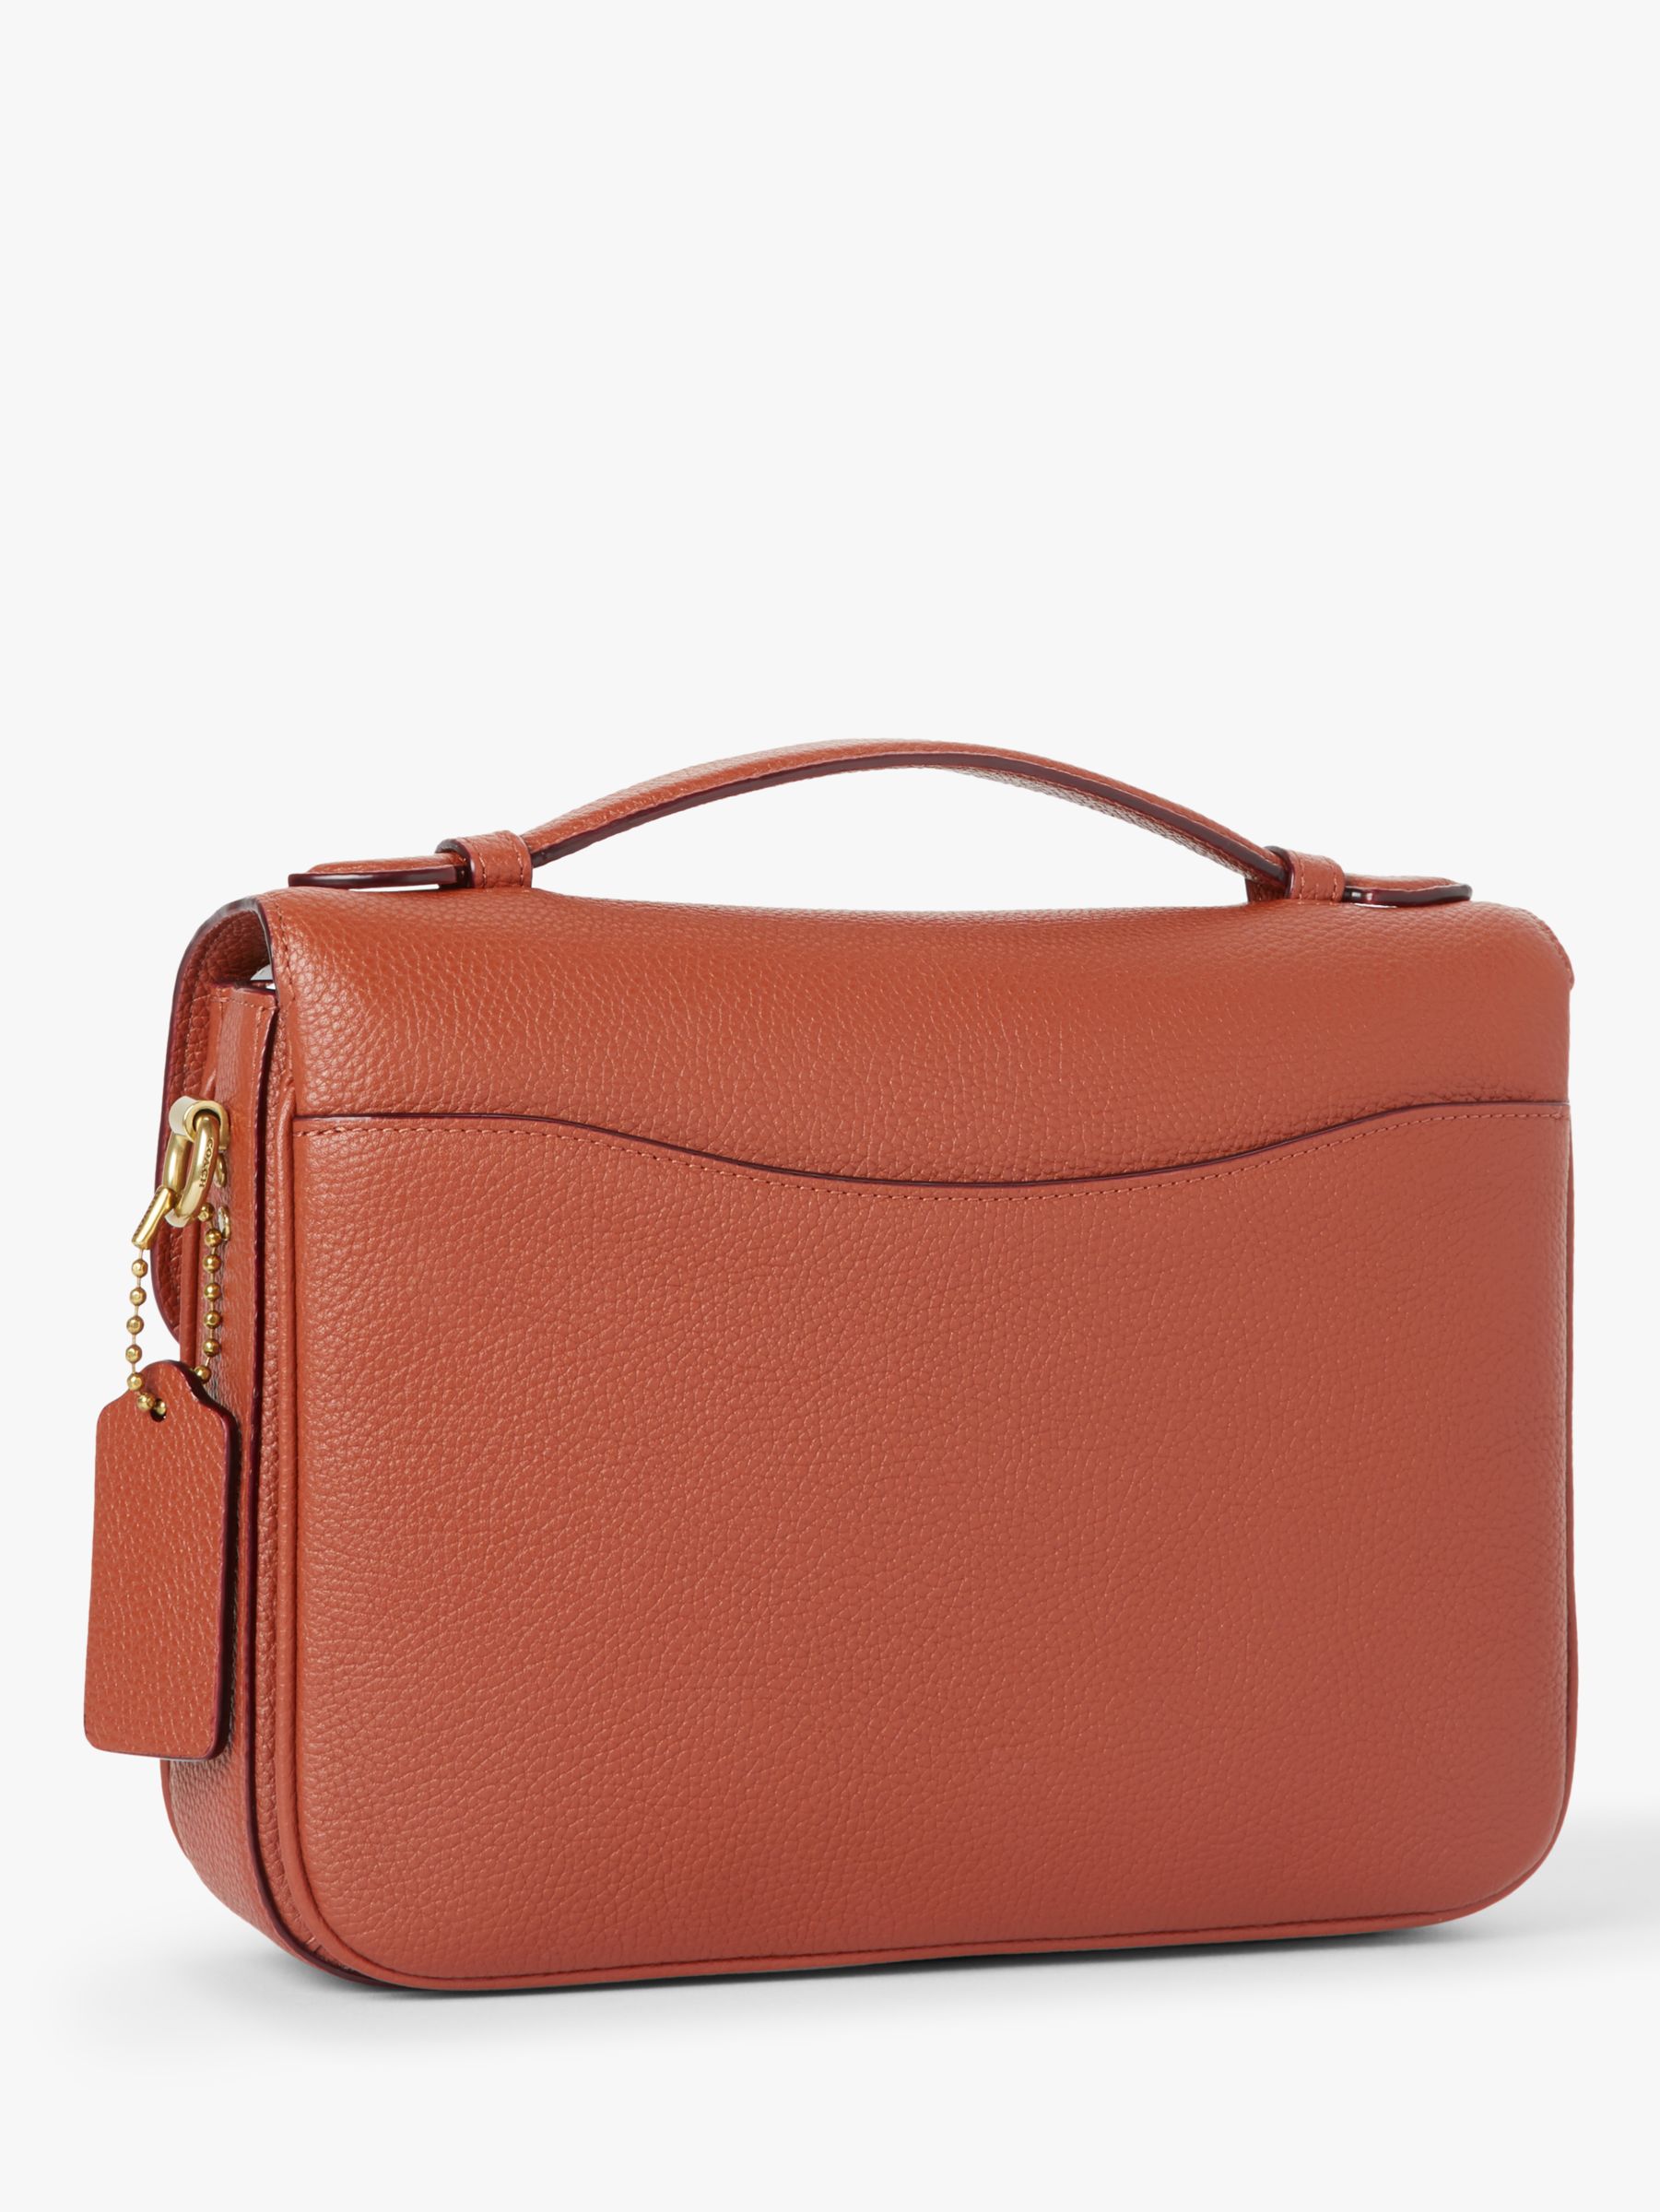 Coach Cassie Leather Cross Body Bag, Saddle at John Lewis & Partners